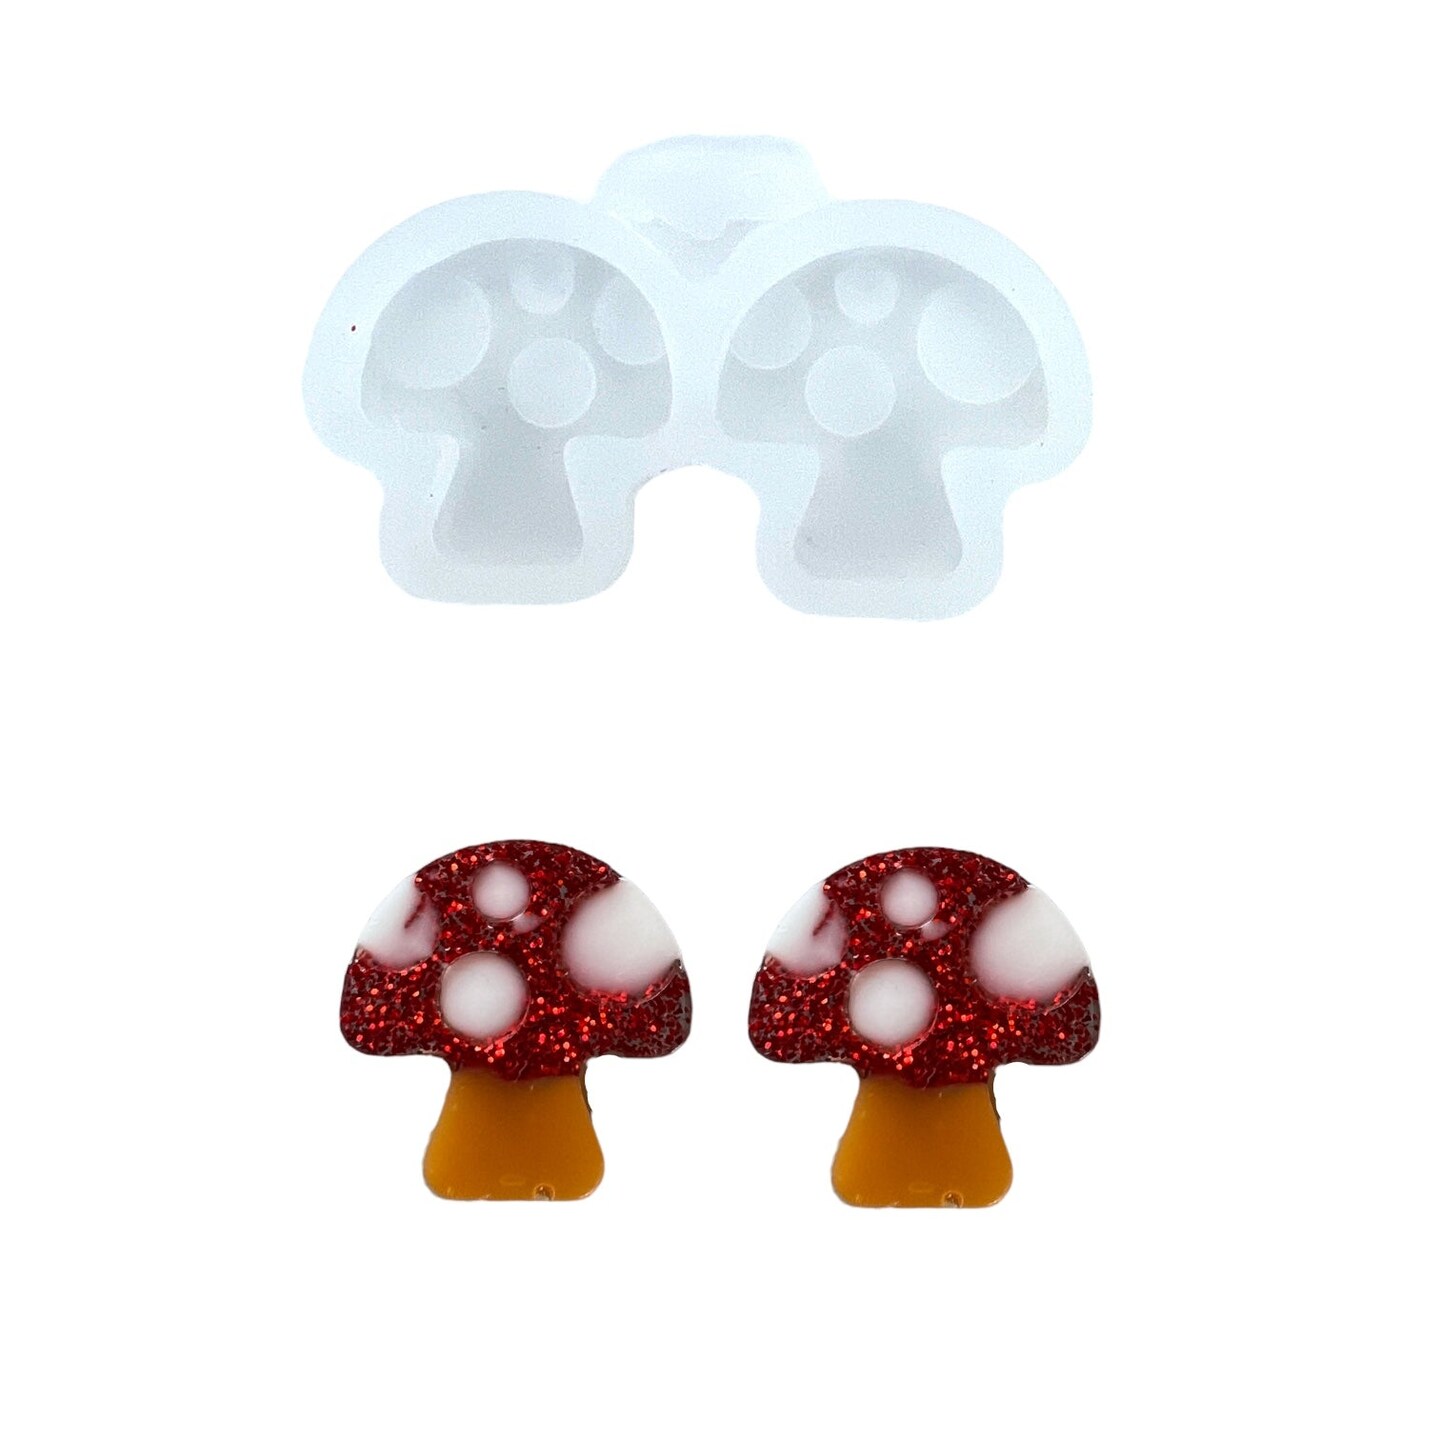 Mini Mushroom Resin Rockers Exclusive Stud Earring Mold for UV and Epoxy Resin